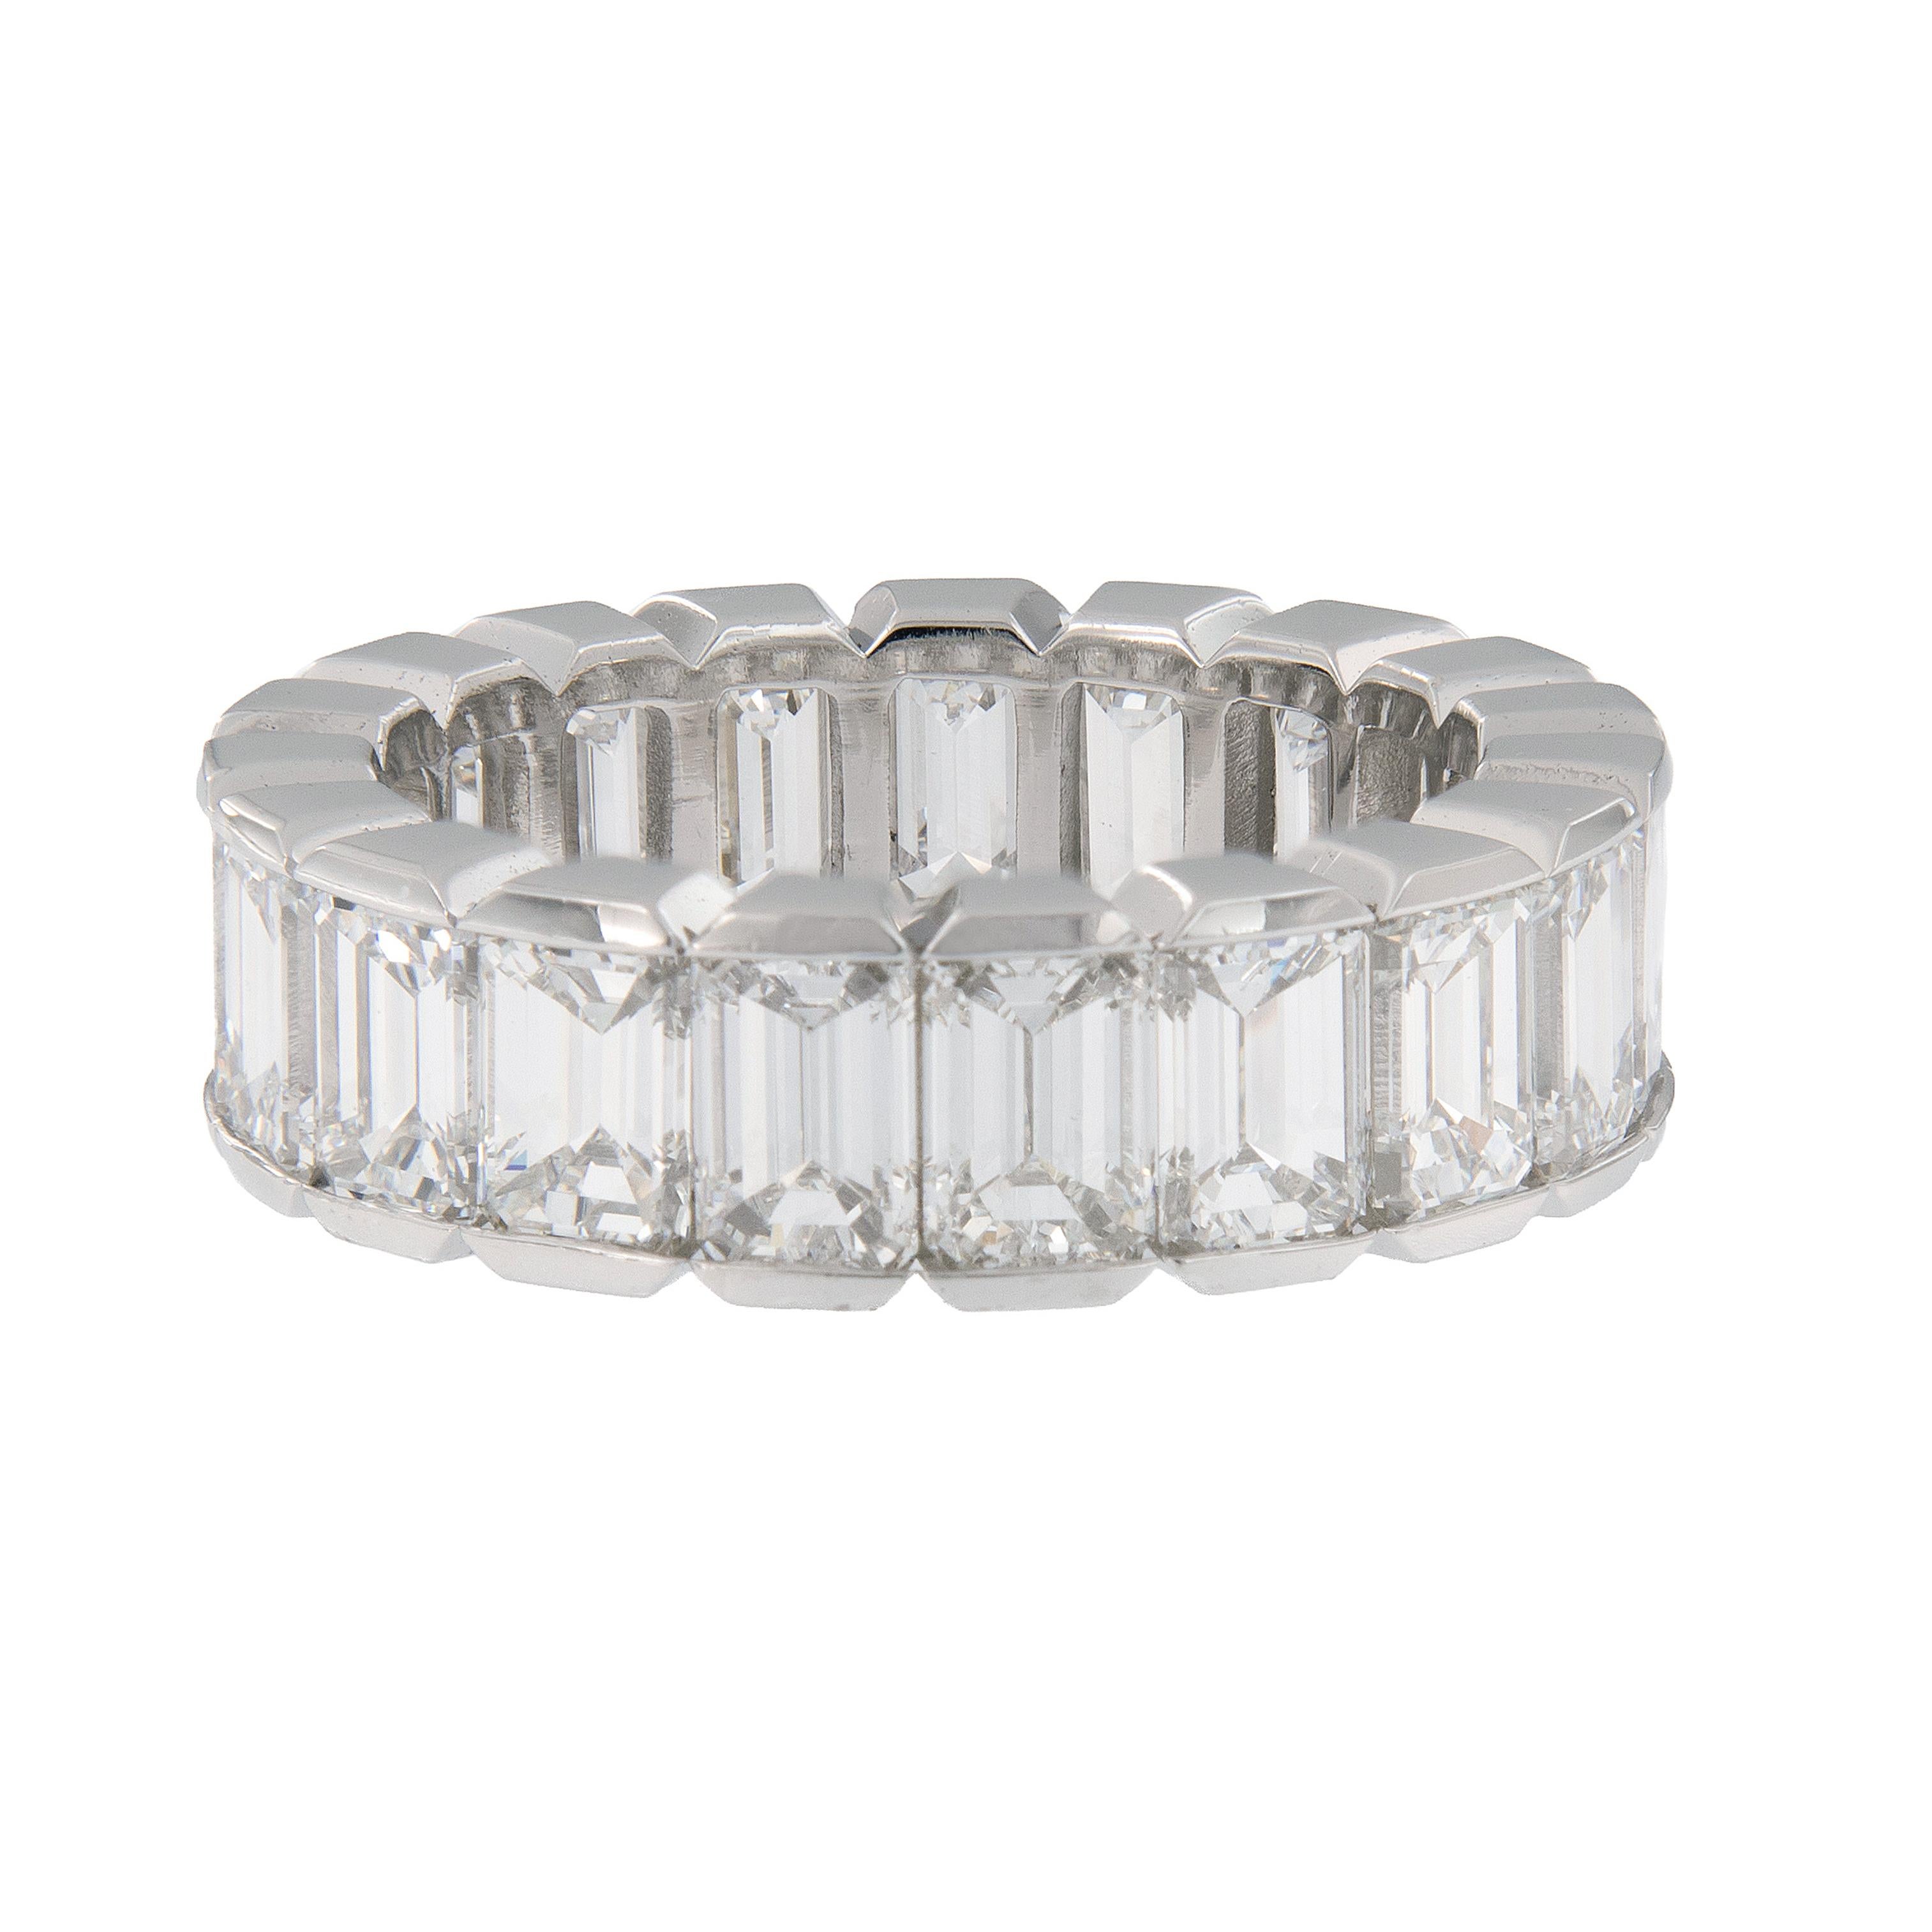 Stunning eternity ring hand-fabricated in platinum features 19 emerald-cut, perfectly matching diamonds. Ring size 6.25. Weighs 9.3 grams.

Diamonds 8.02 Cttw VVS, D-F